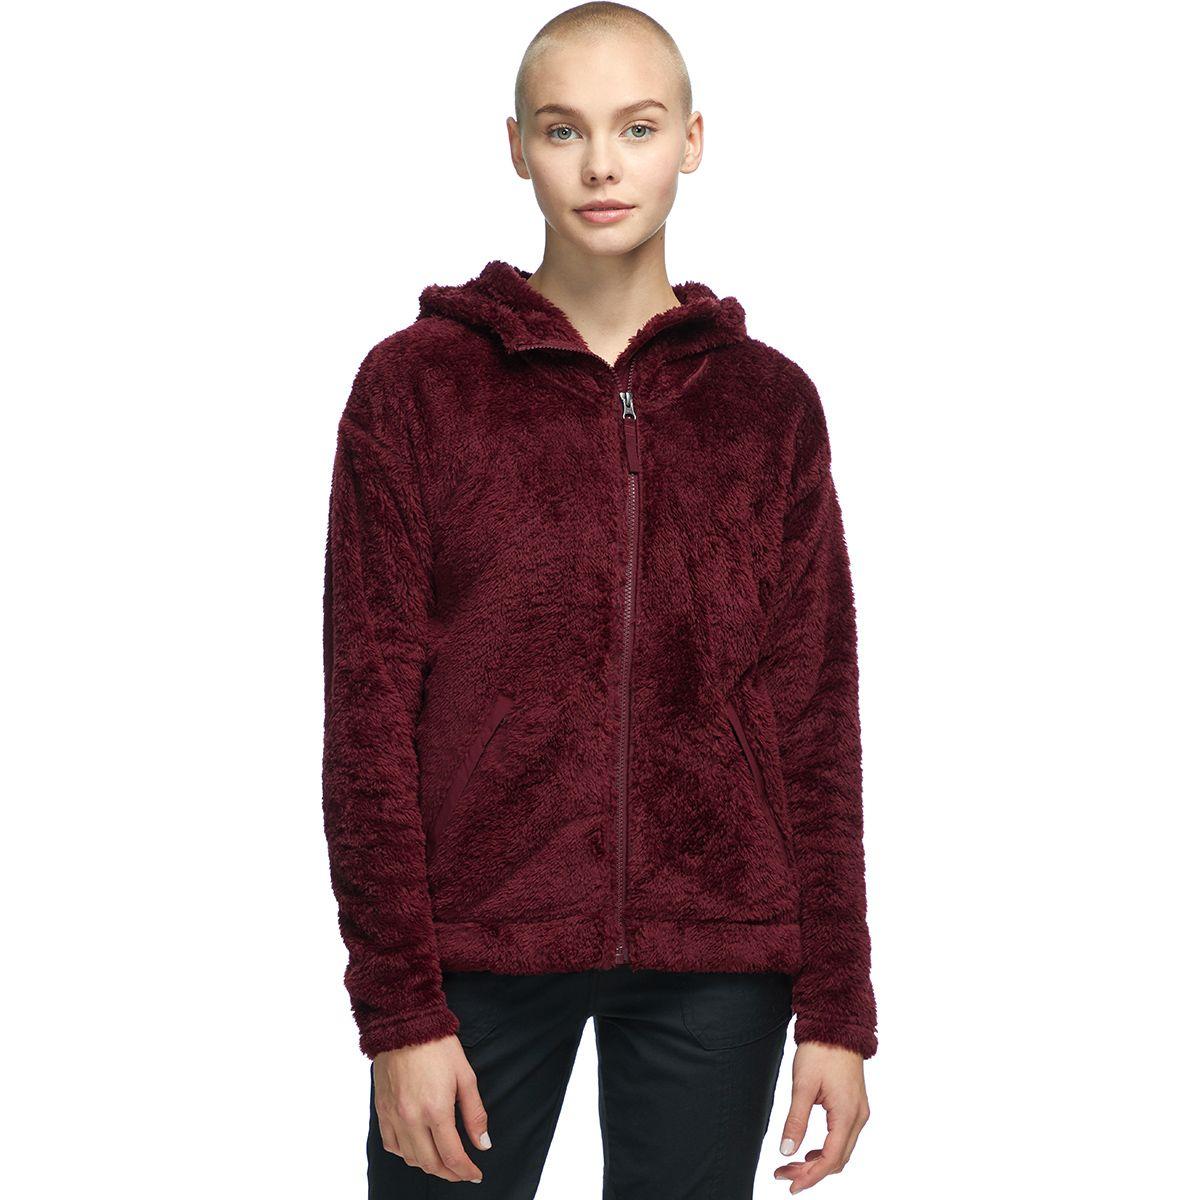 The North Face Furry Fleece Hooded Jacket in Deep Garnet Red (Red) - Lyst